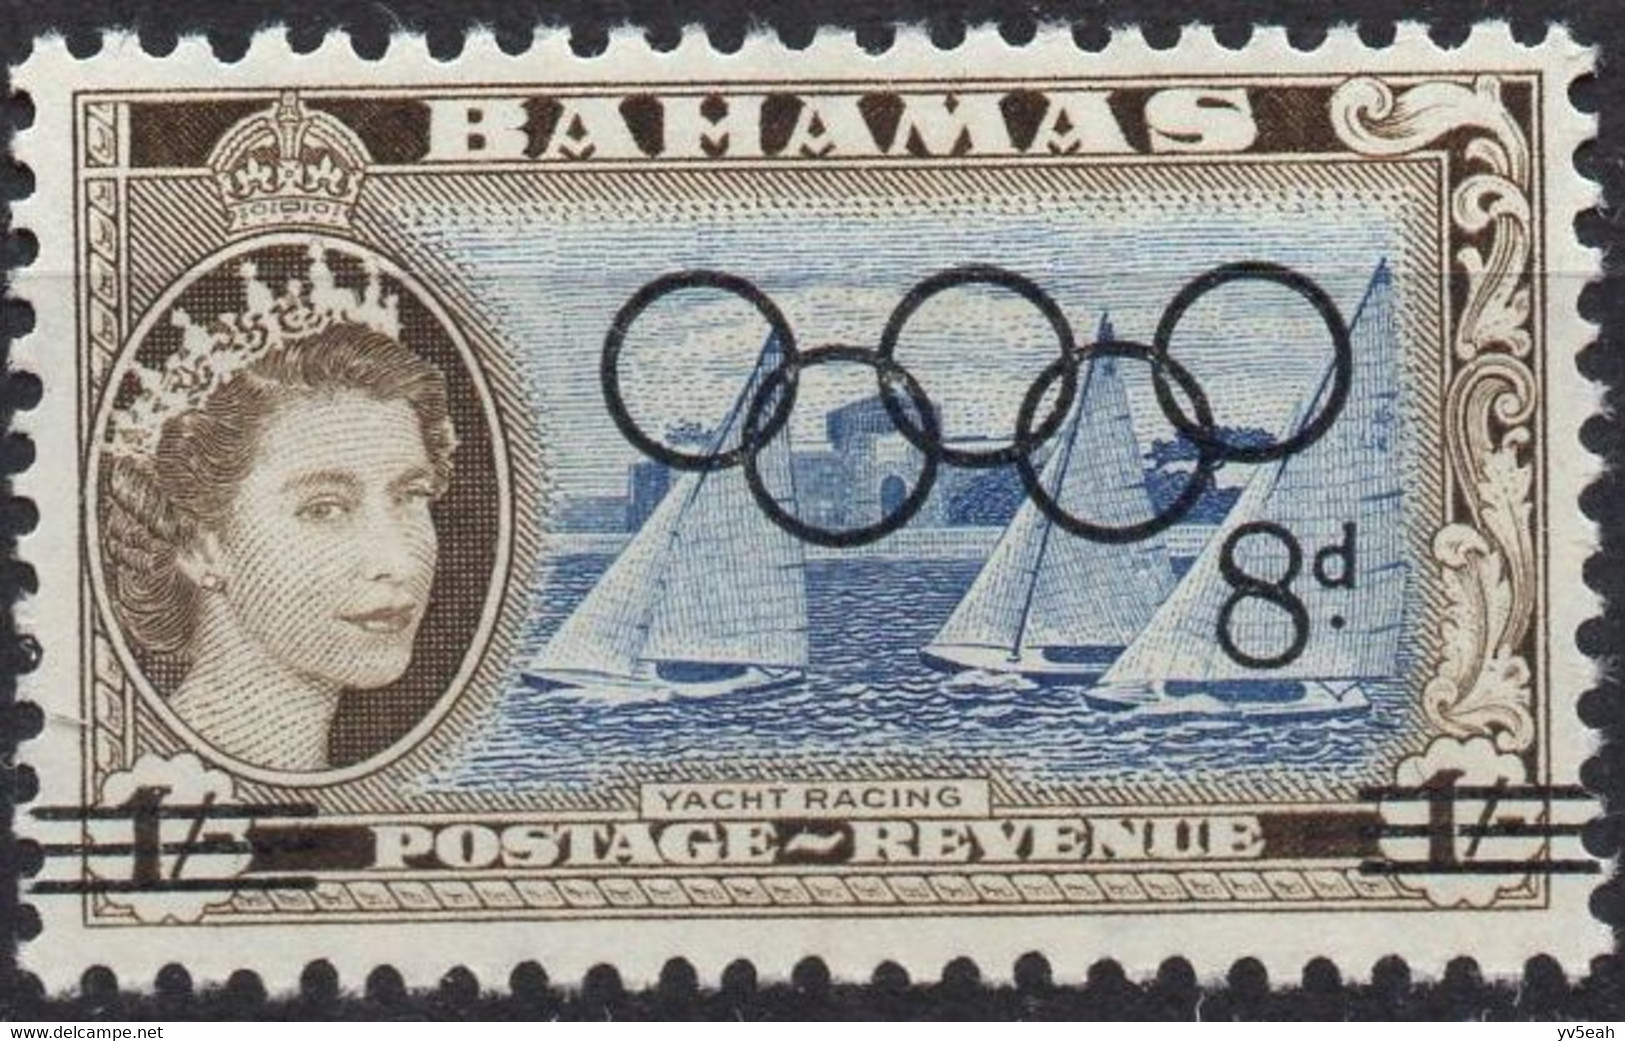 BAHAMAS/1964/MNH/SC#202/QUEEN ELIZABETH II / QEII / SAILING / BOATS / TOKYO SUMMER OLYMPIC GAMES/ - 1963-1973 Ministerial Government